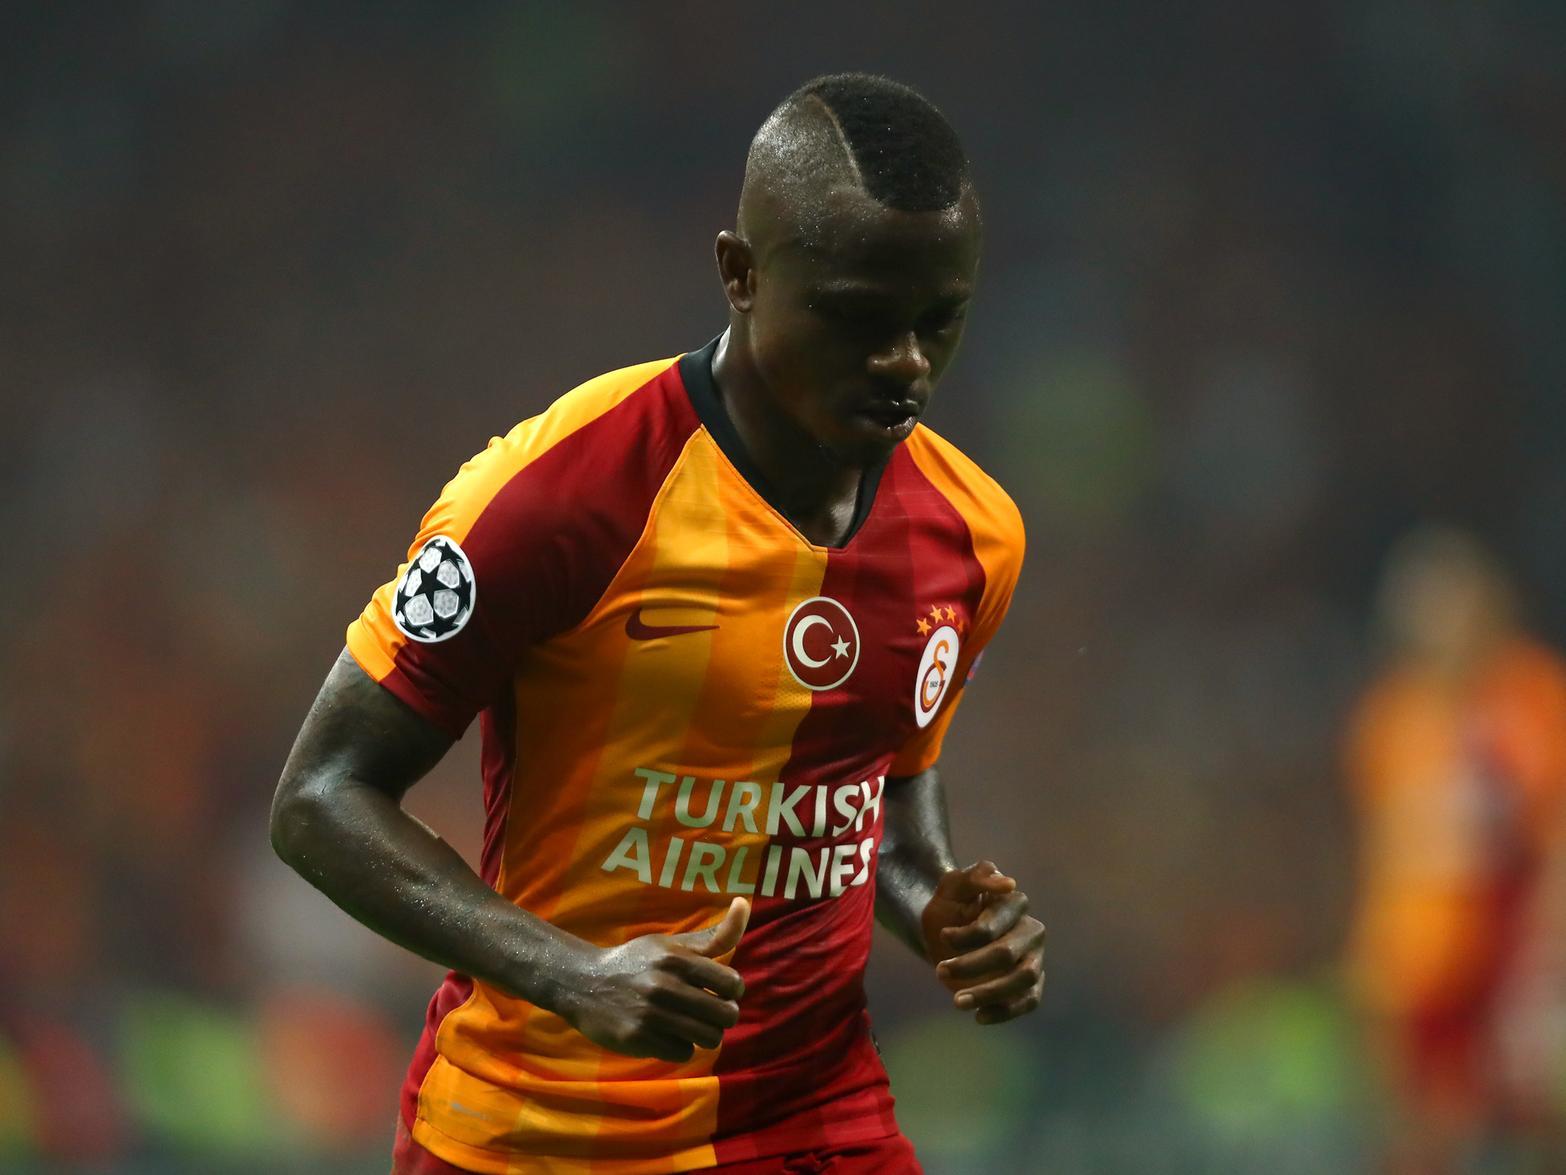 Fulham midfielder Jean Michael Seri looks set to return to Craven Cottage in January, after failing to impress during the first half of his loan spell with Galatasaray. (Sport Witness)